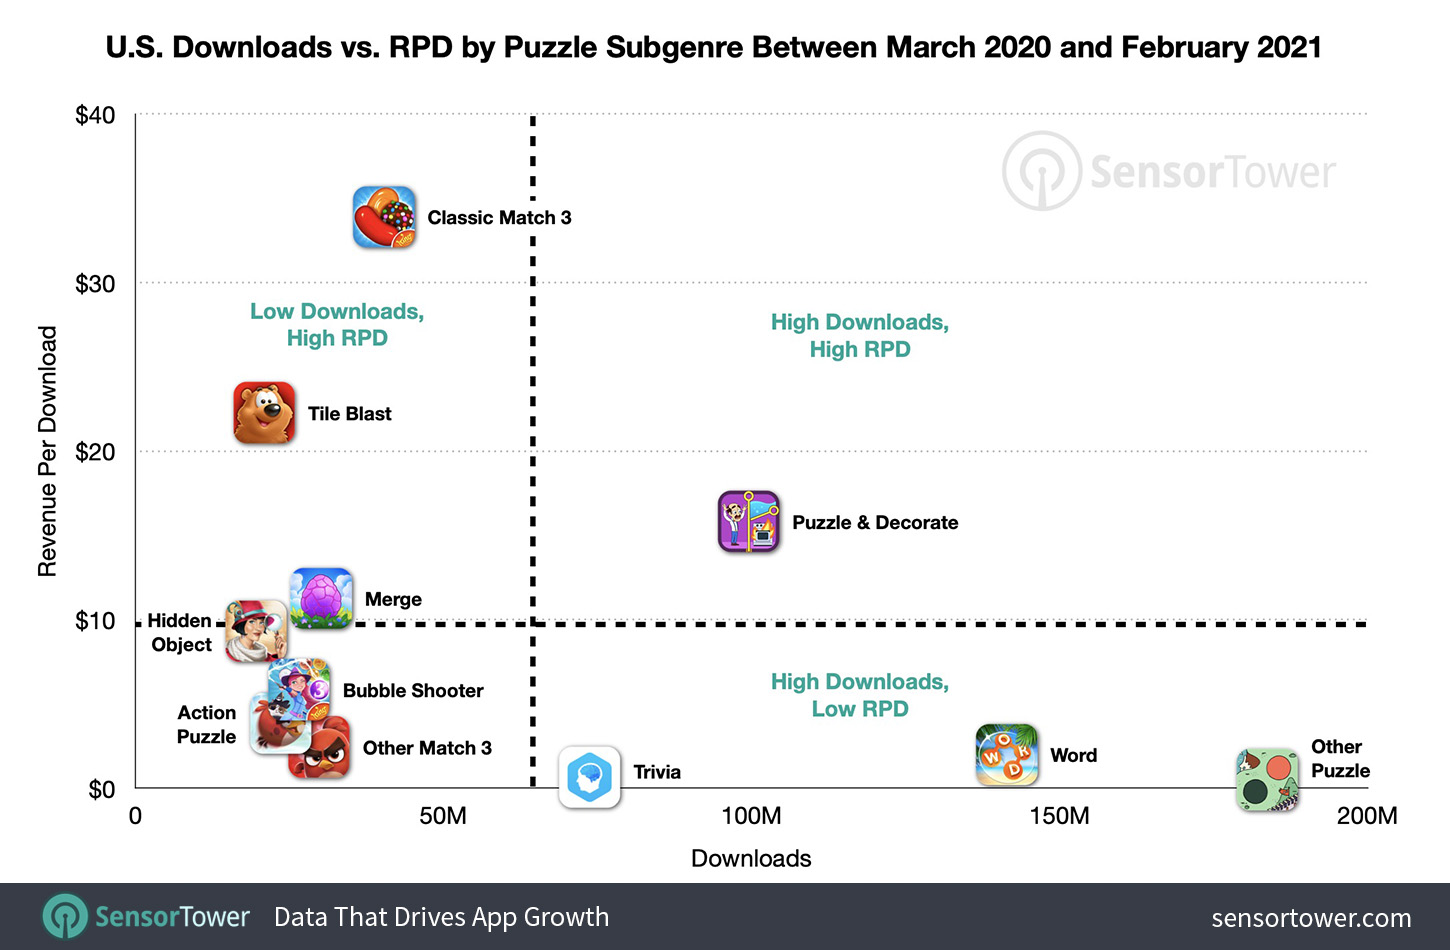 U.S. Downloads Vs. RPD by Puzzle Game Subgenre Between March 2020 and February 2021